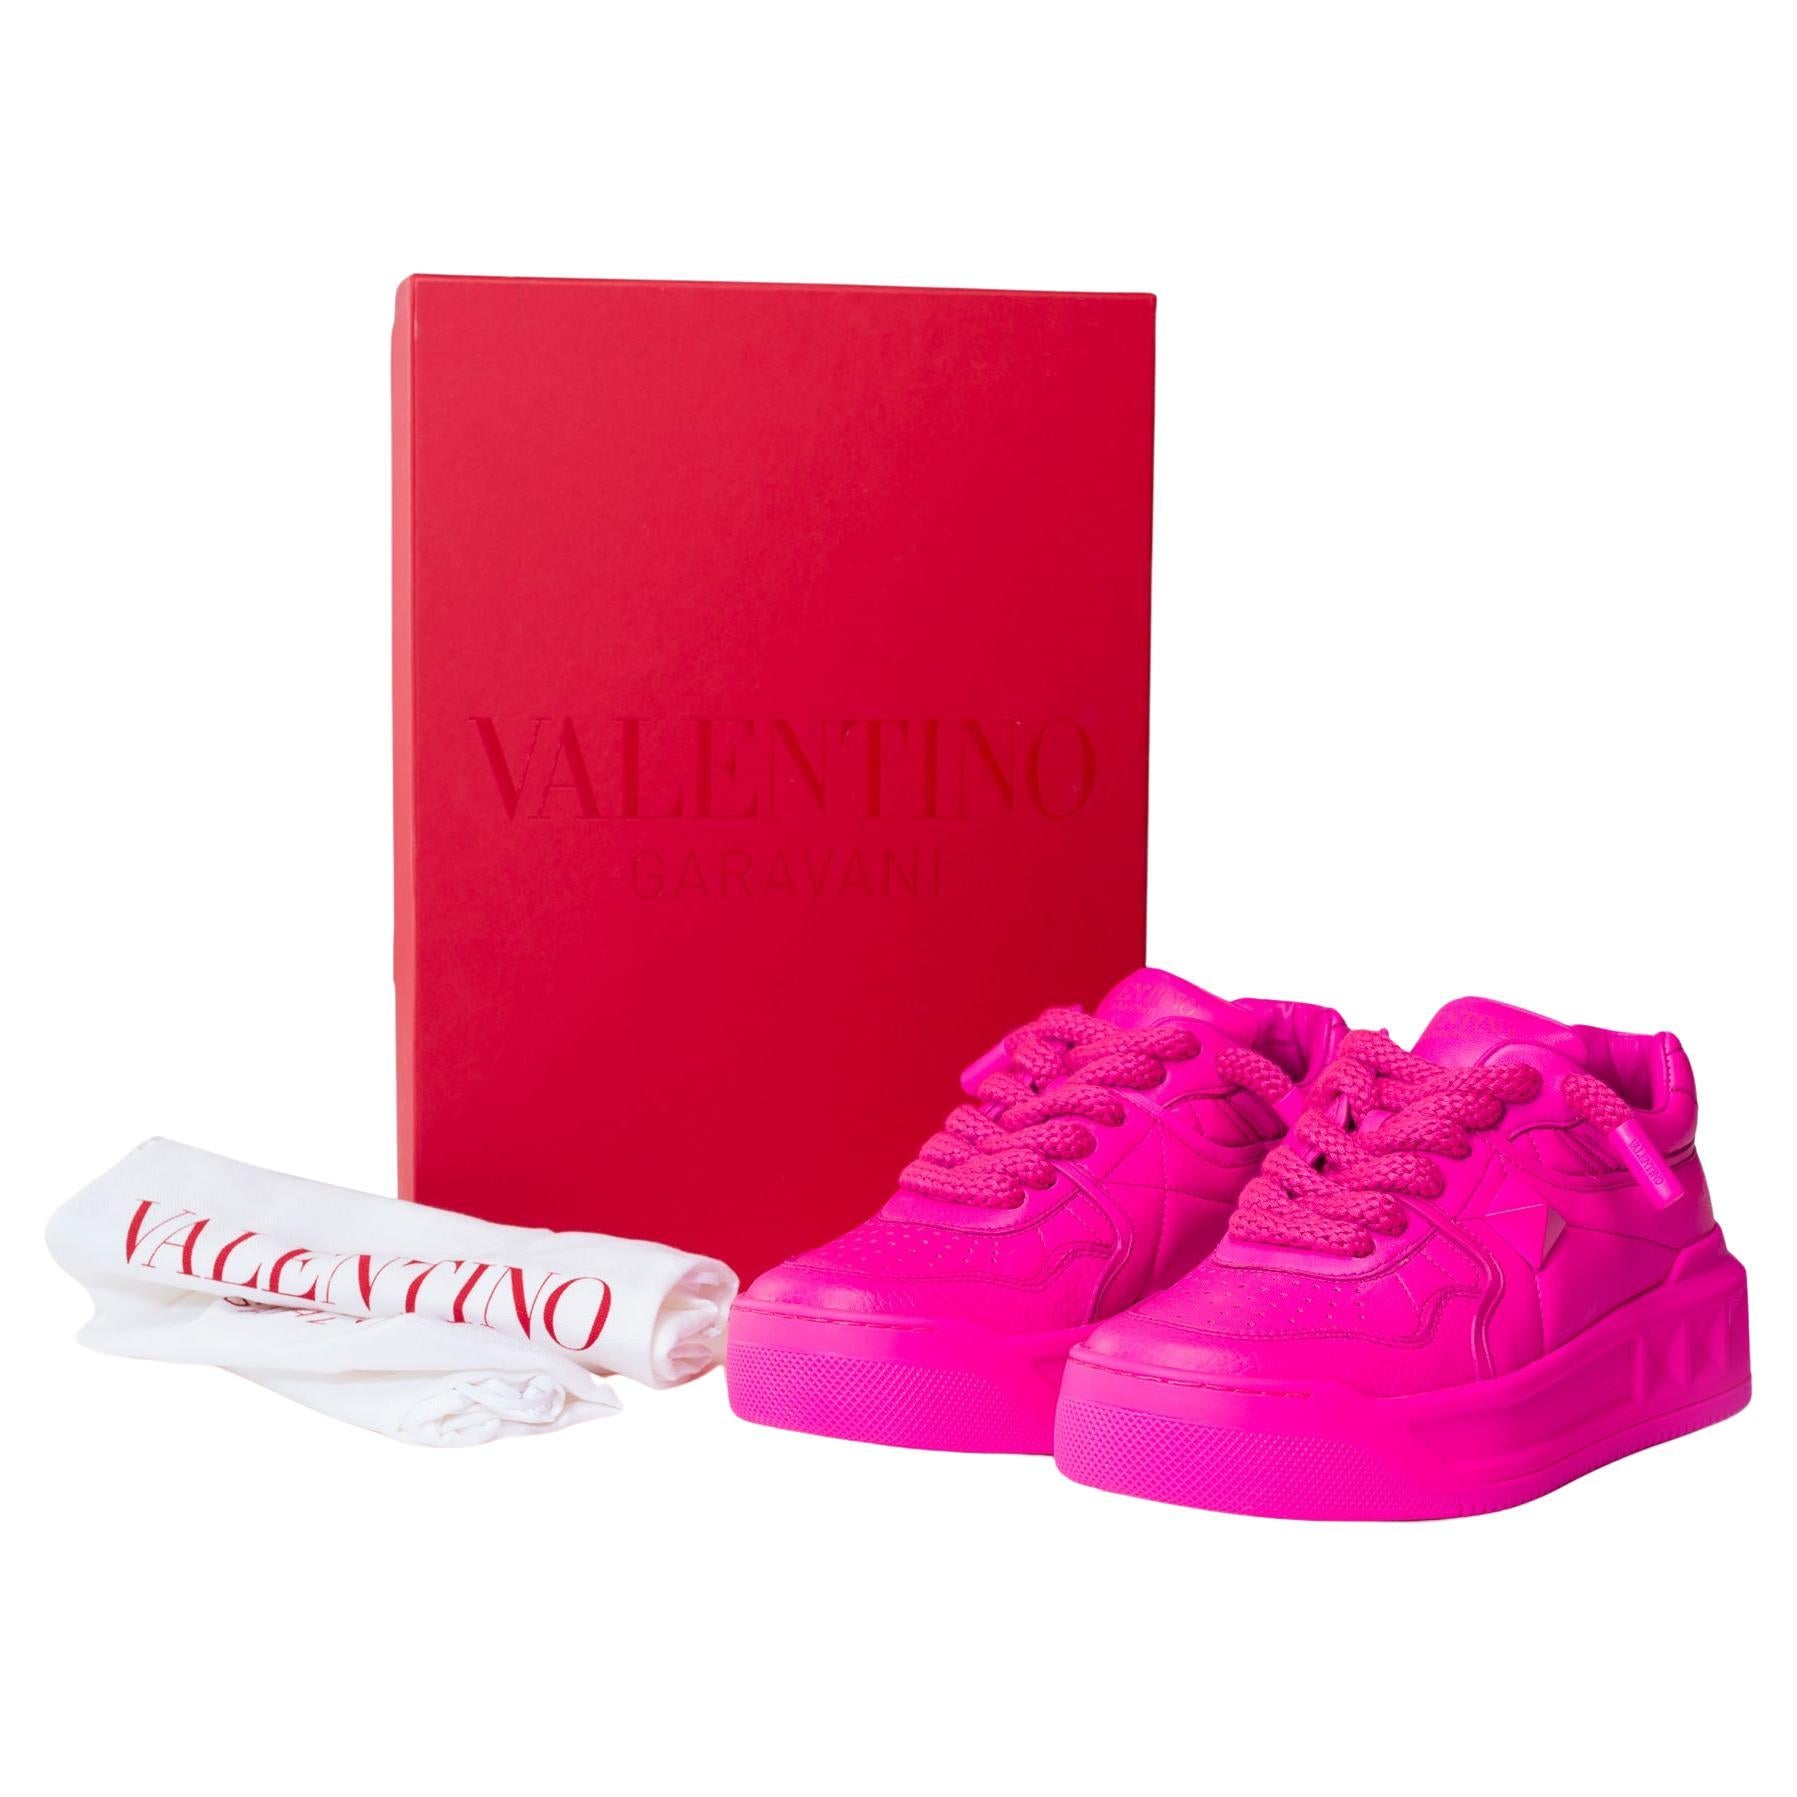 New Valentino Garavani ONE STUD XL Women Sneakers in Pink leather, Size 39 For Sale